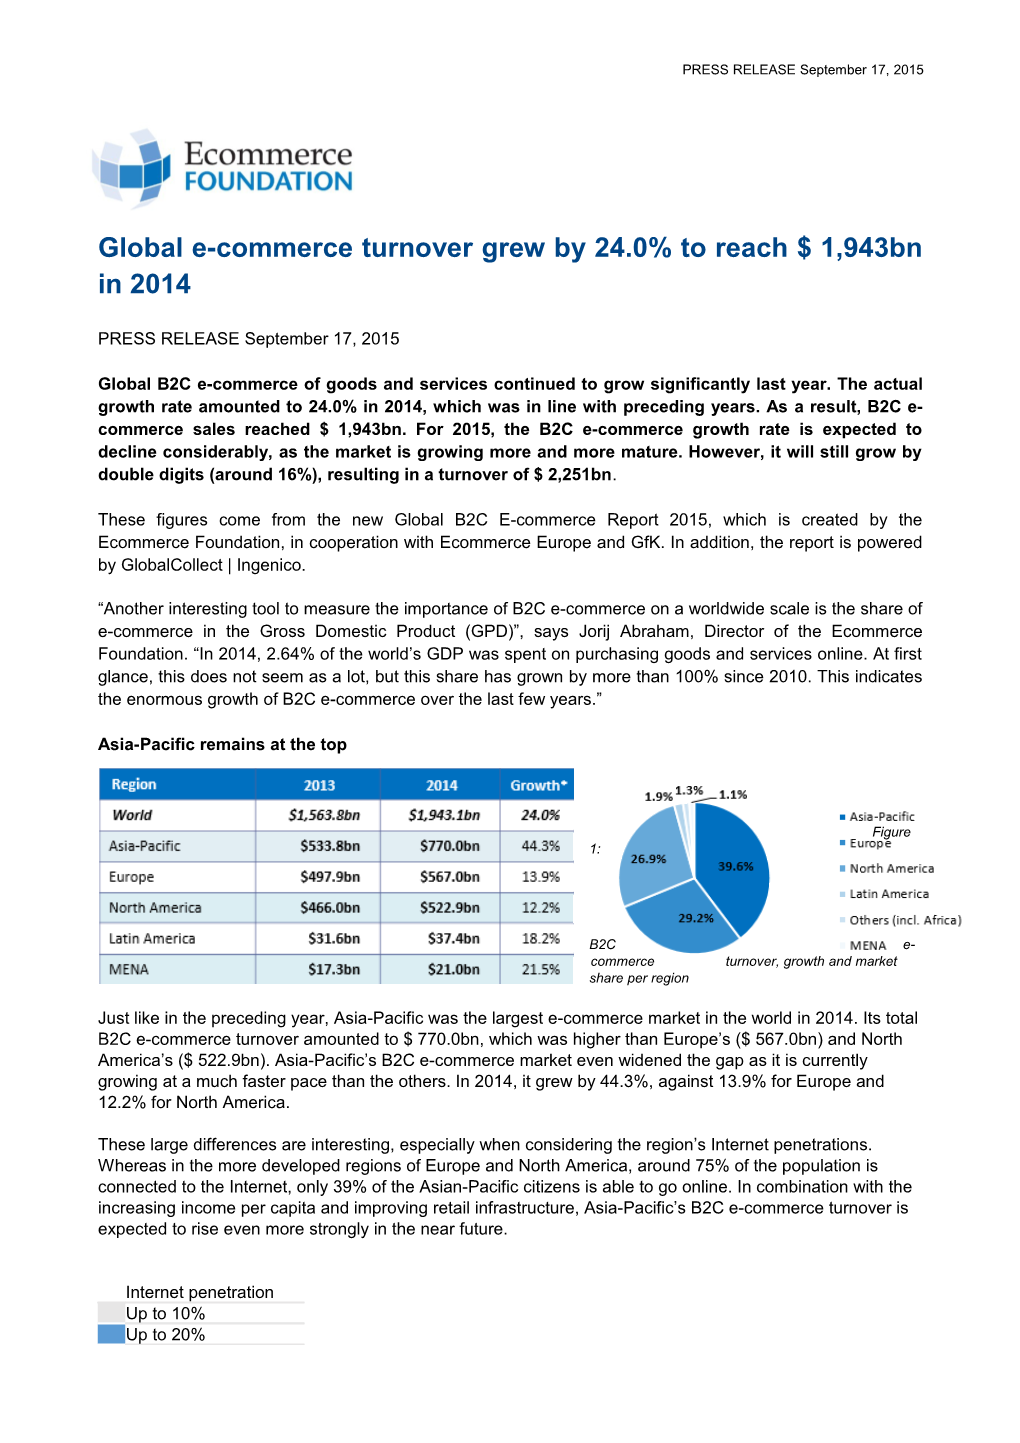 Globale-Commerce Turnover Grew by 24.0% to Reach $1,943Bn in 2014